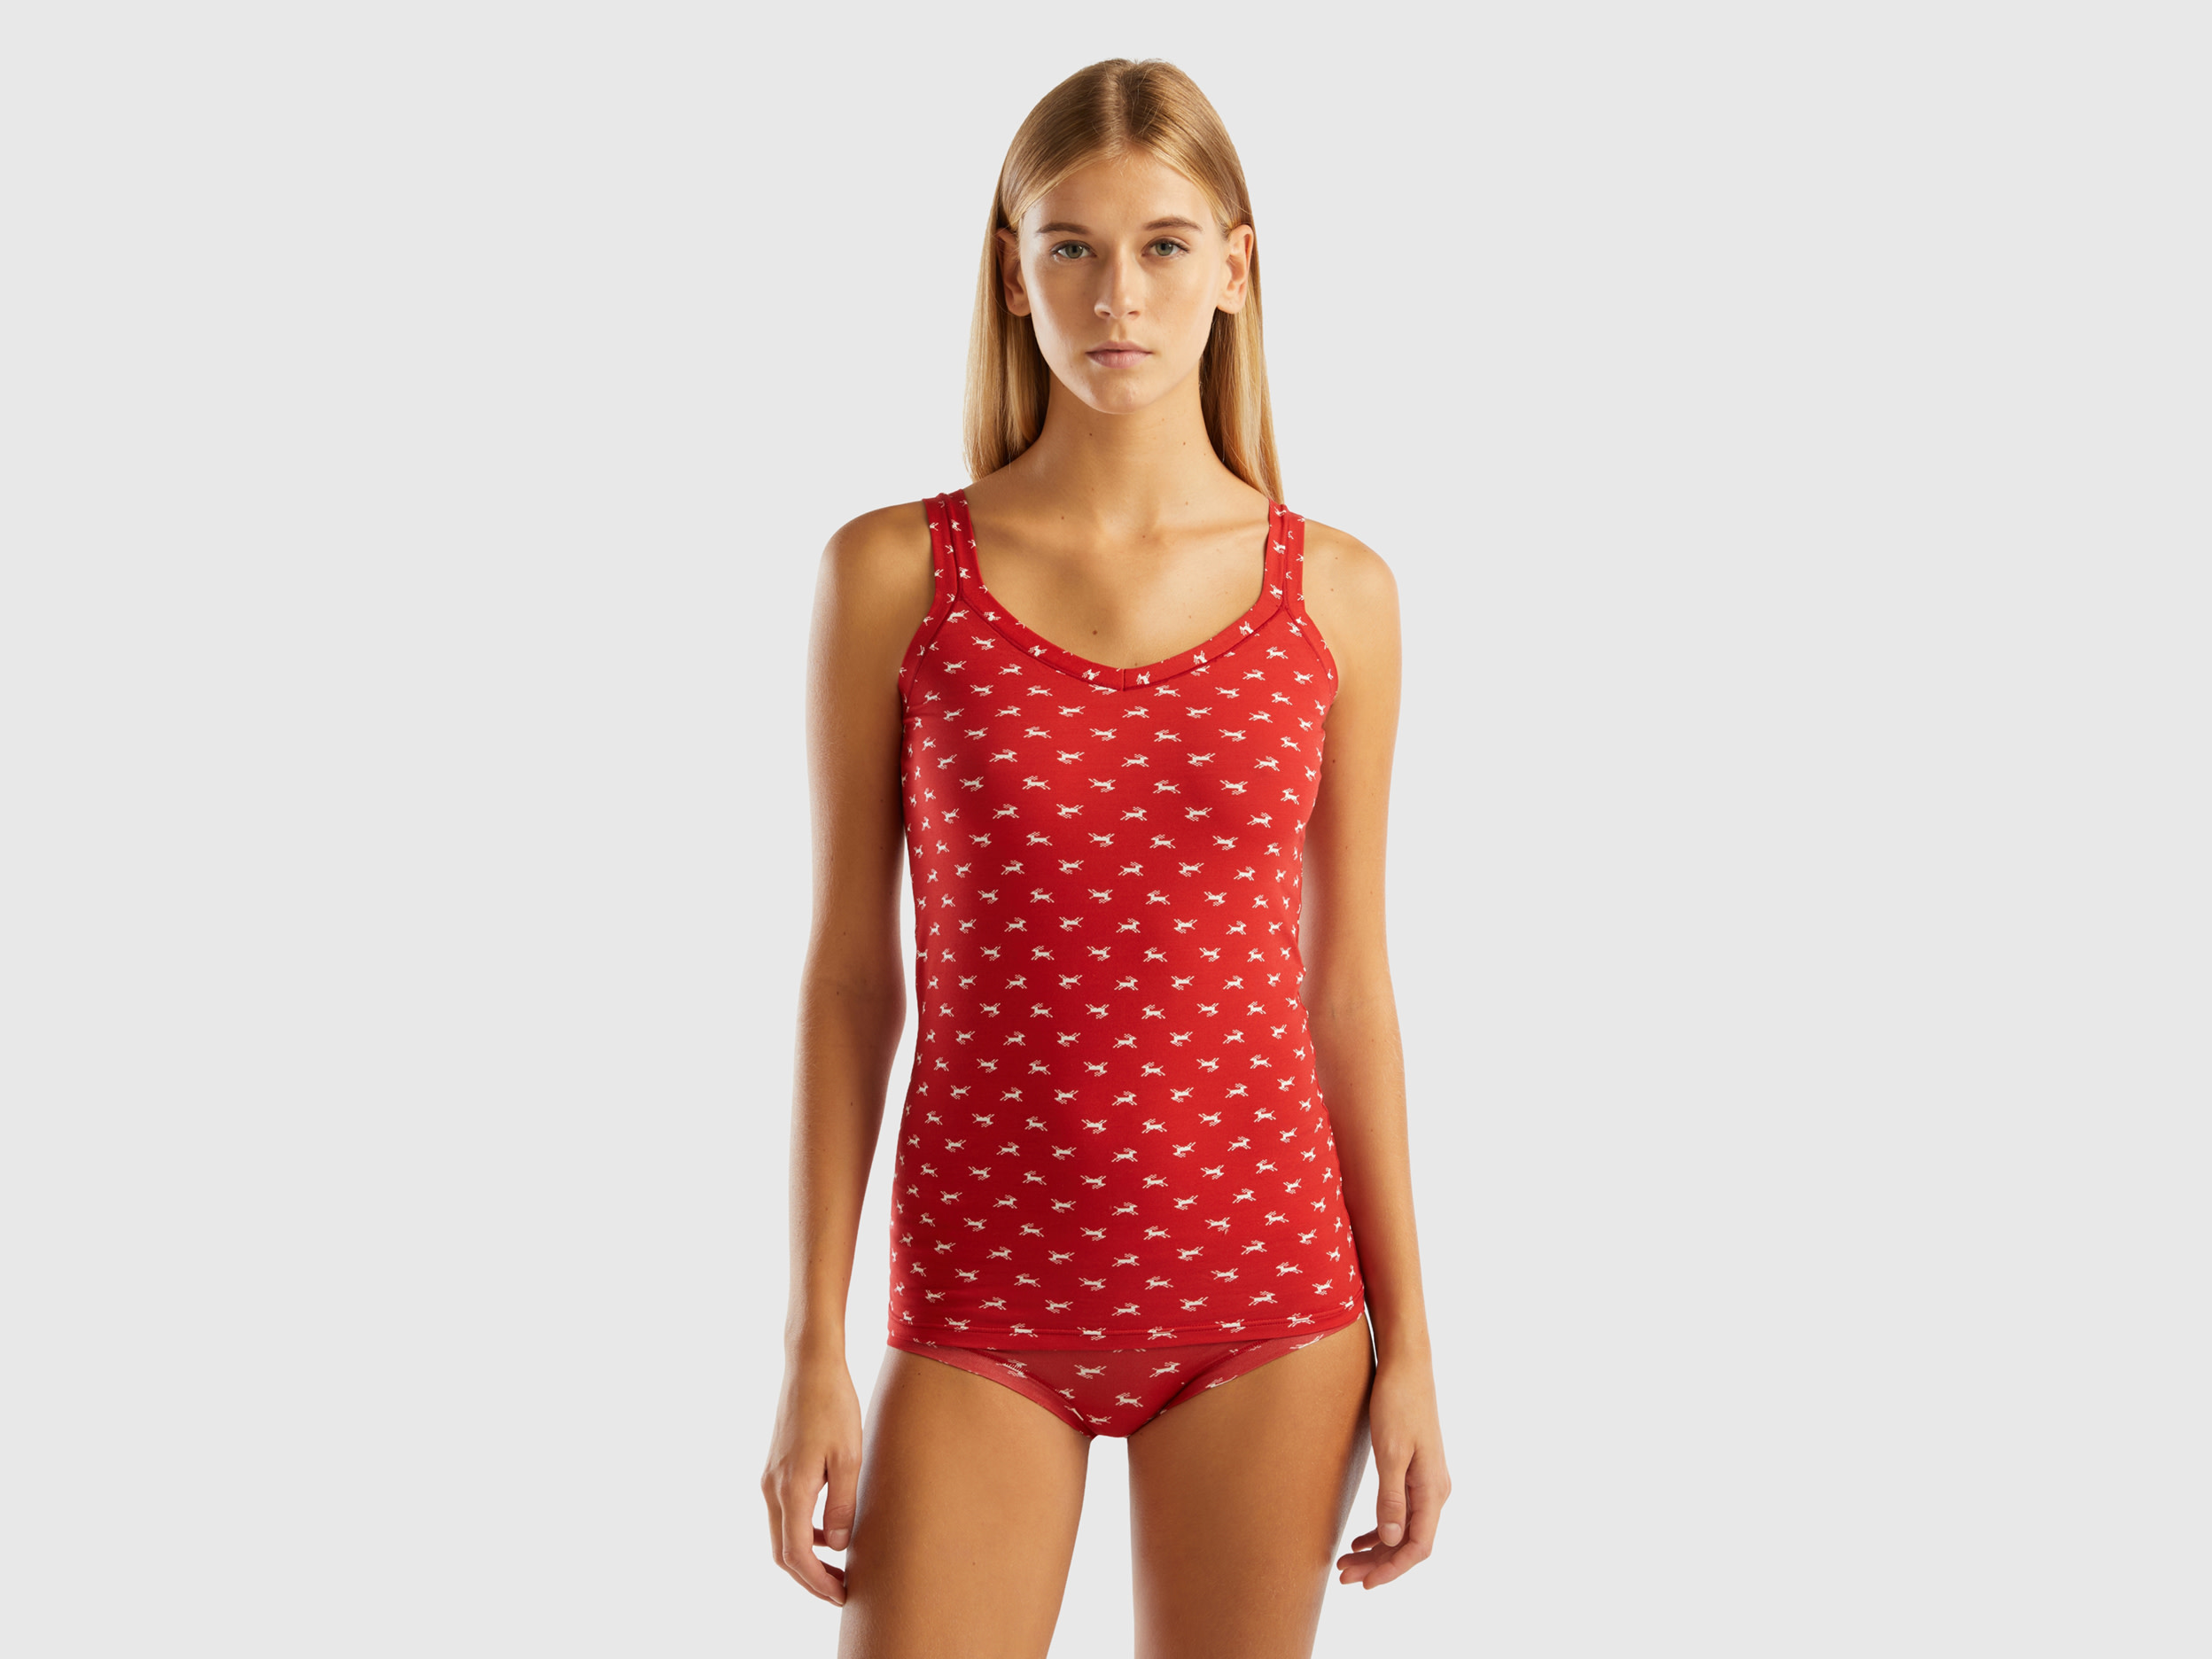 Benetton, Reindeer Tank Top In Super Stretch Organic Cotton, size OS, Red, Women